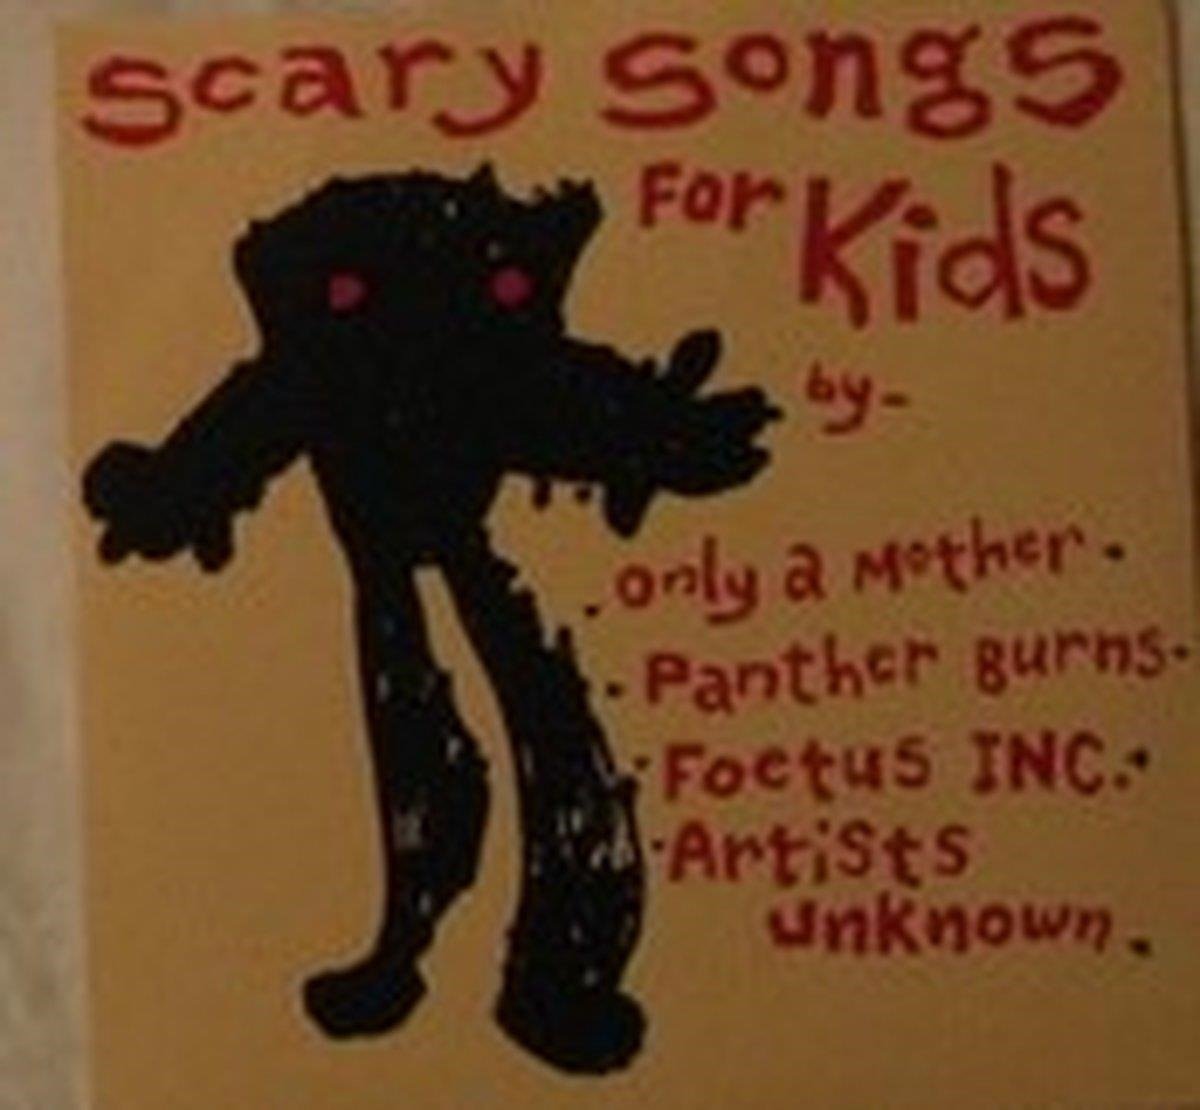 CD Shop - V/A SCARY SONGS FOR KIDS